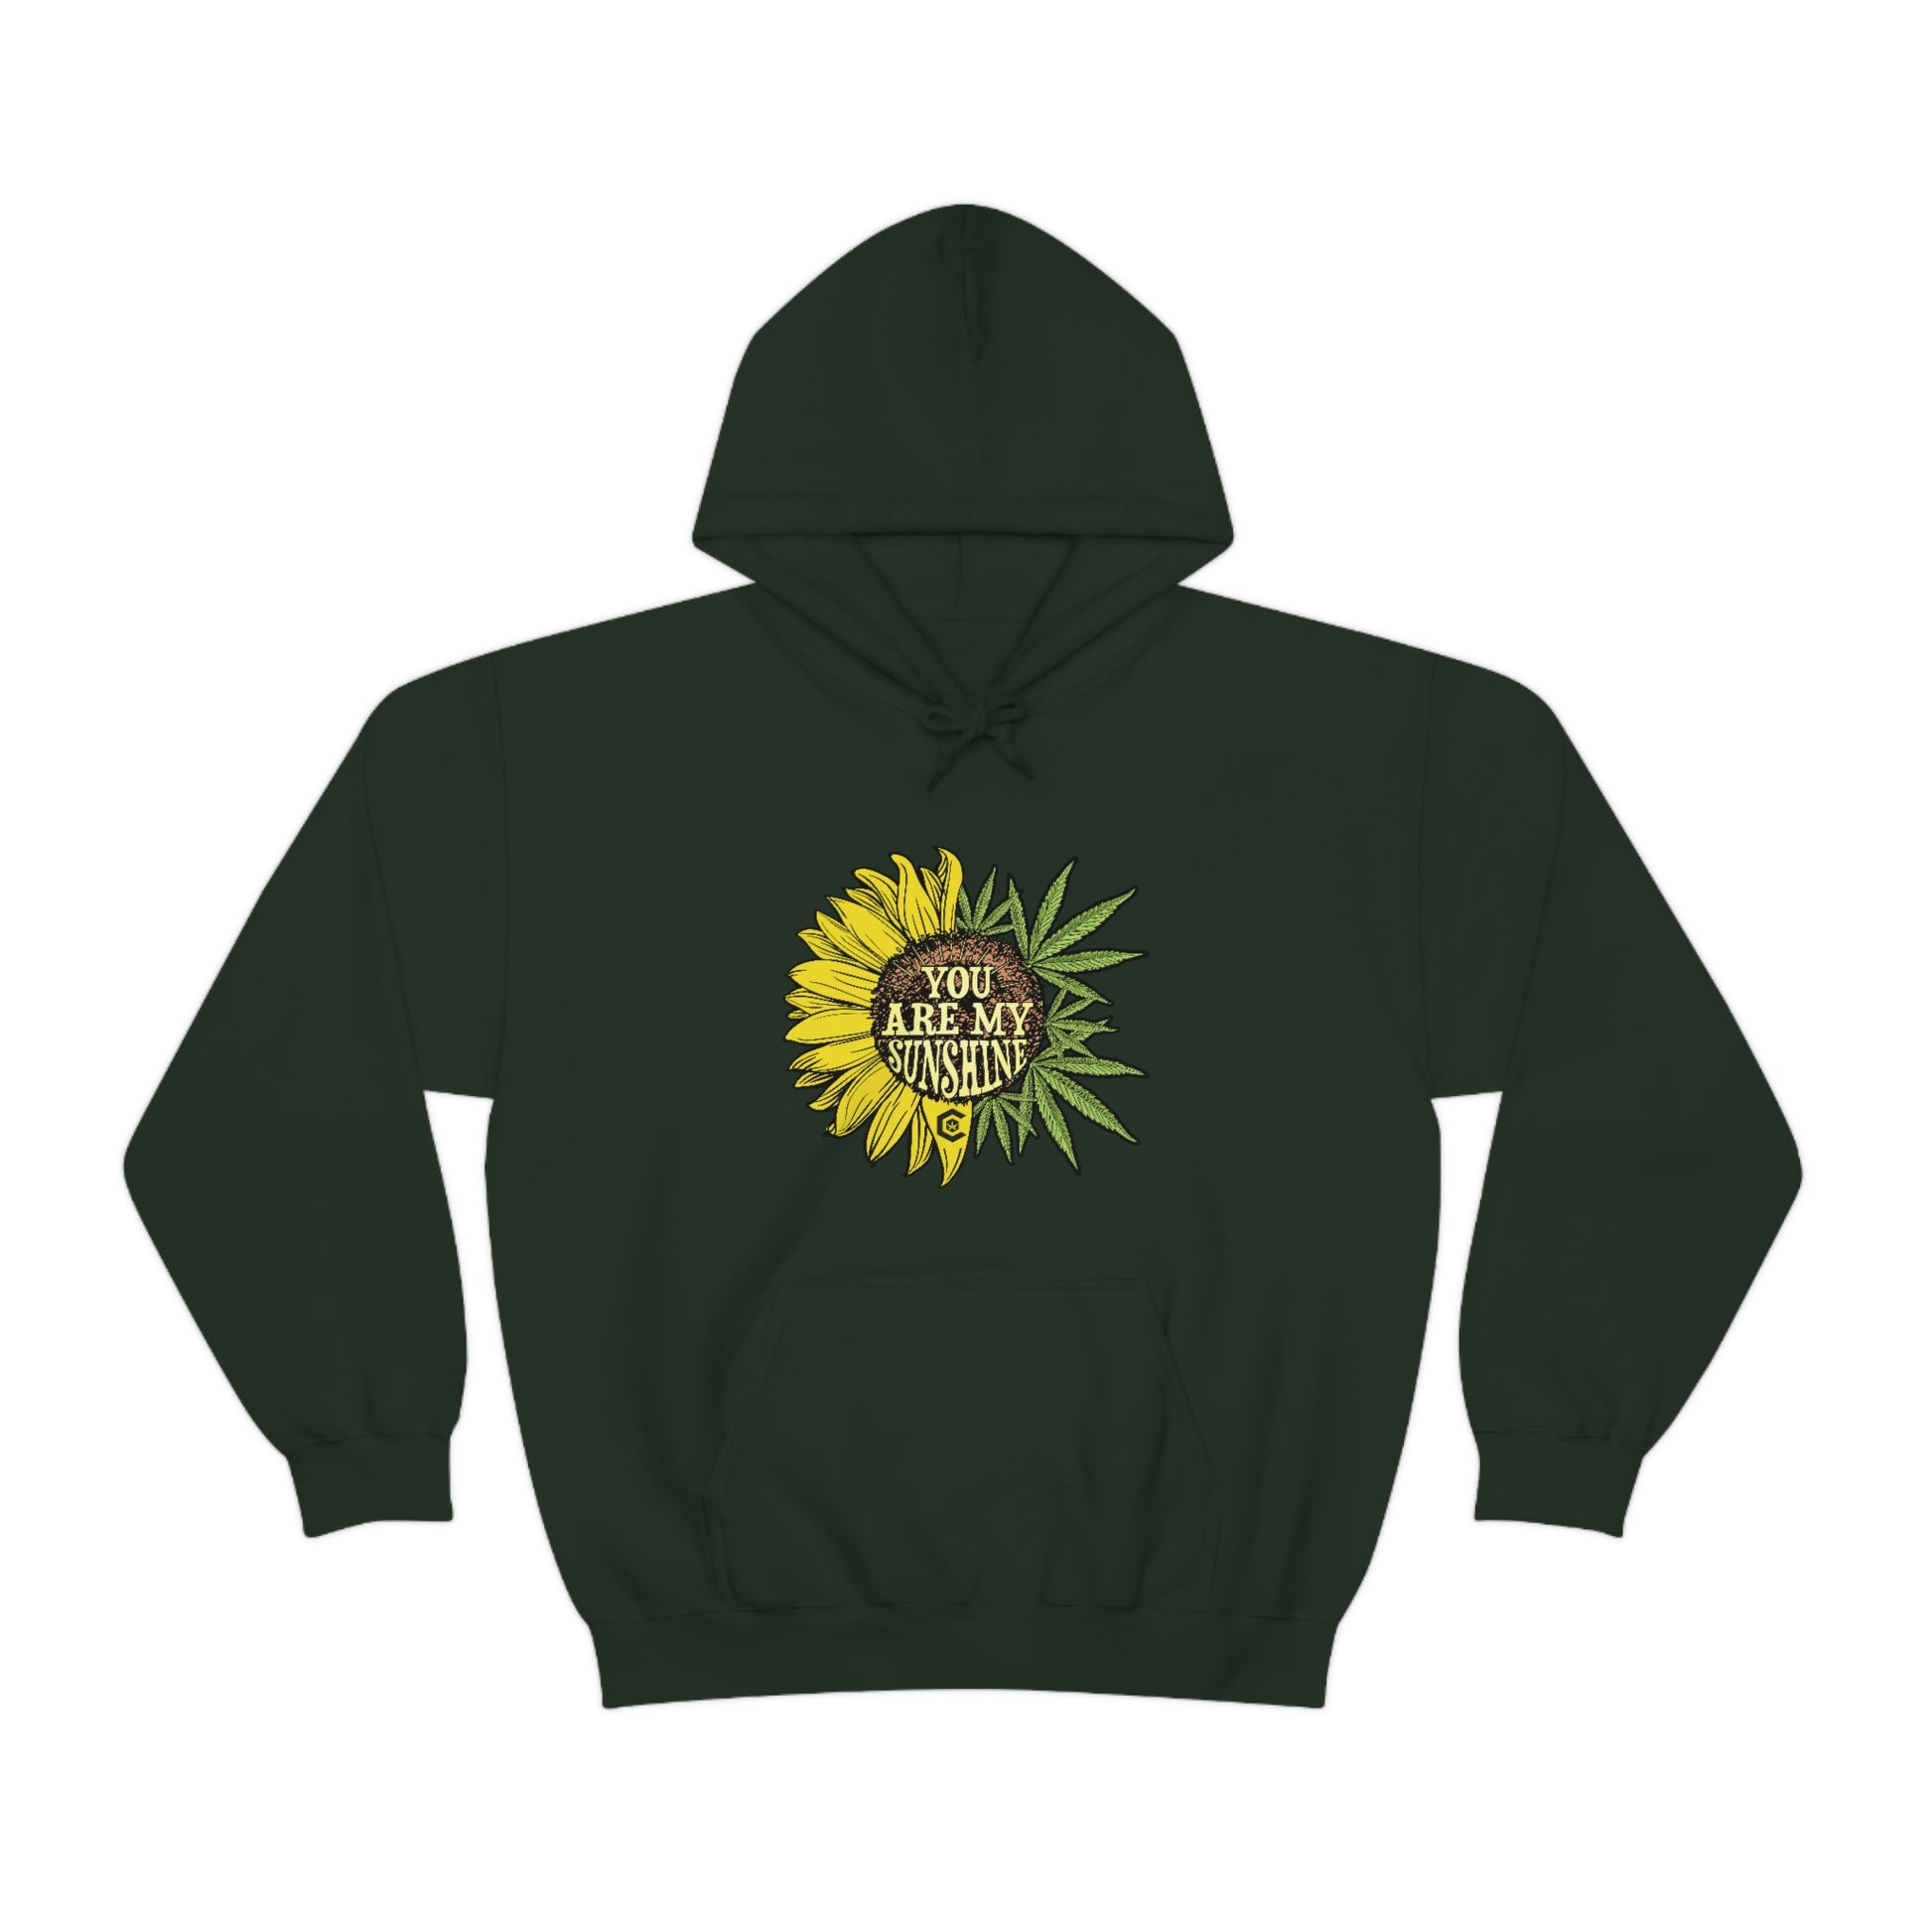 a You Are My Sunshine Cannabis Sweatshirt with a yellow sunflower on it.